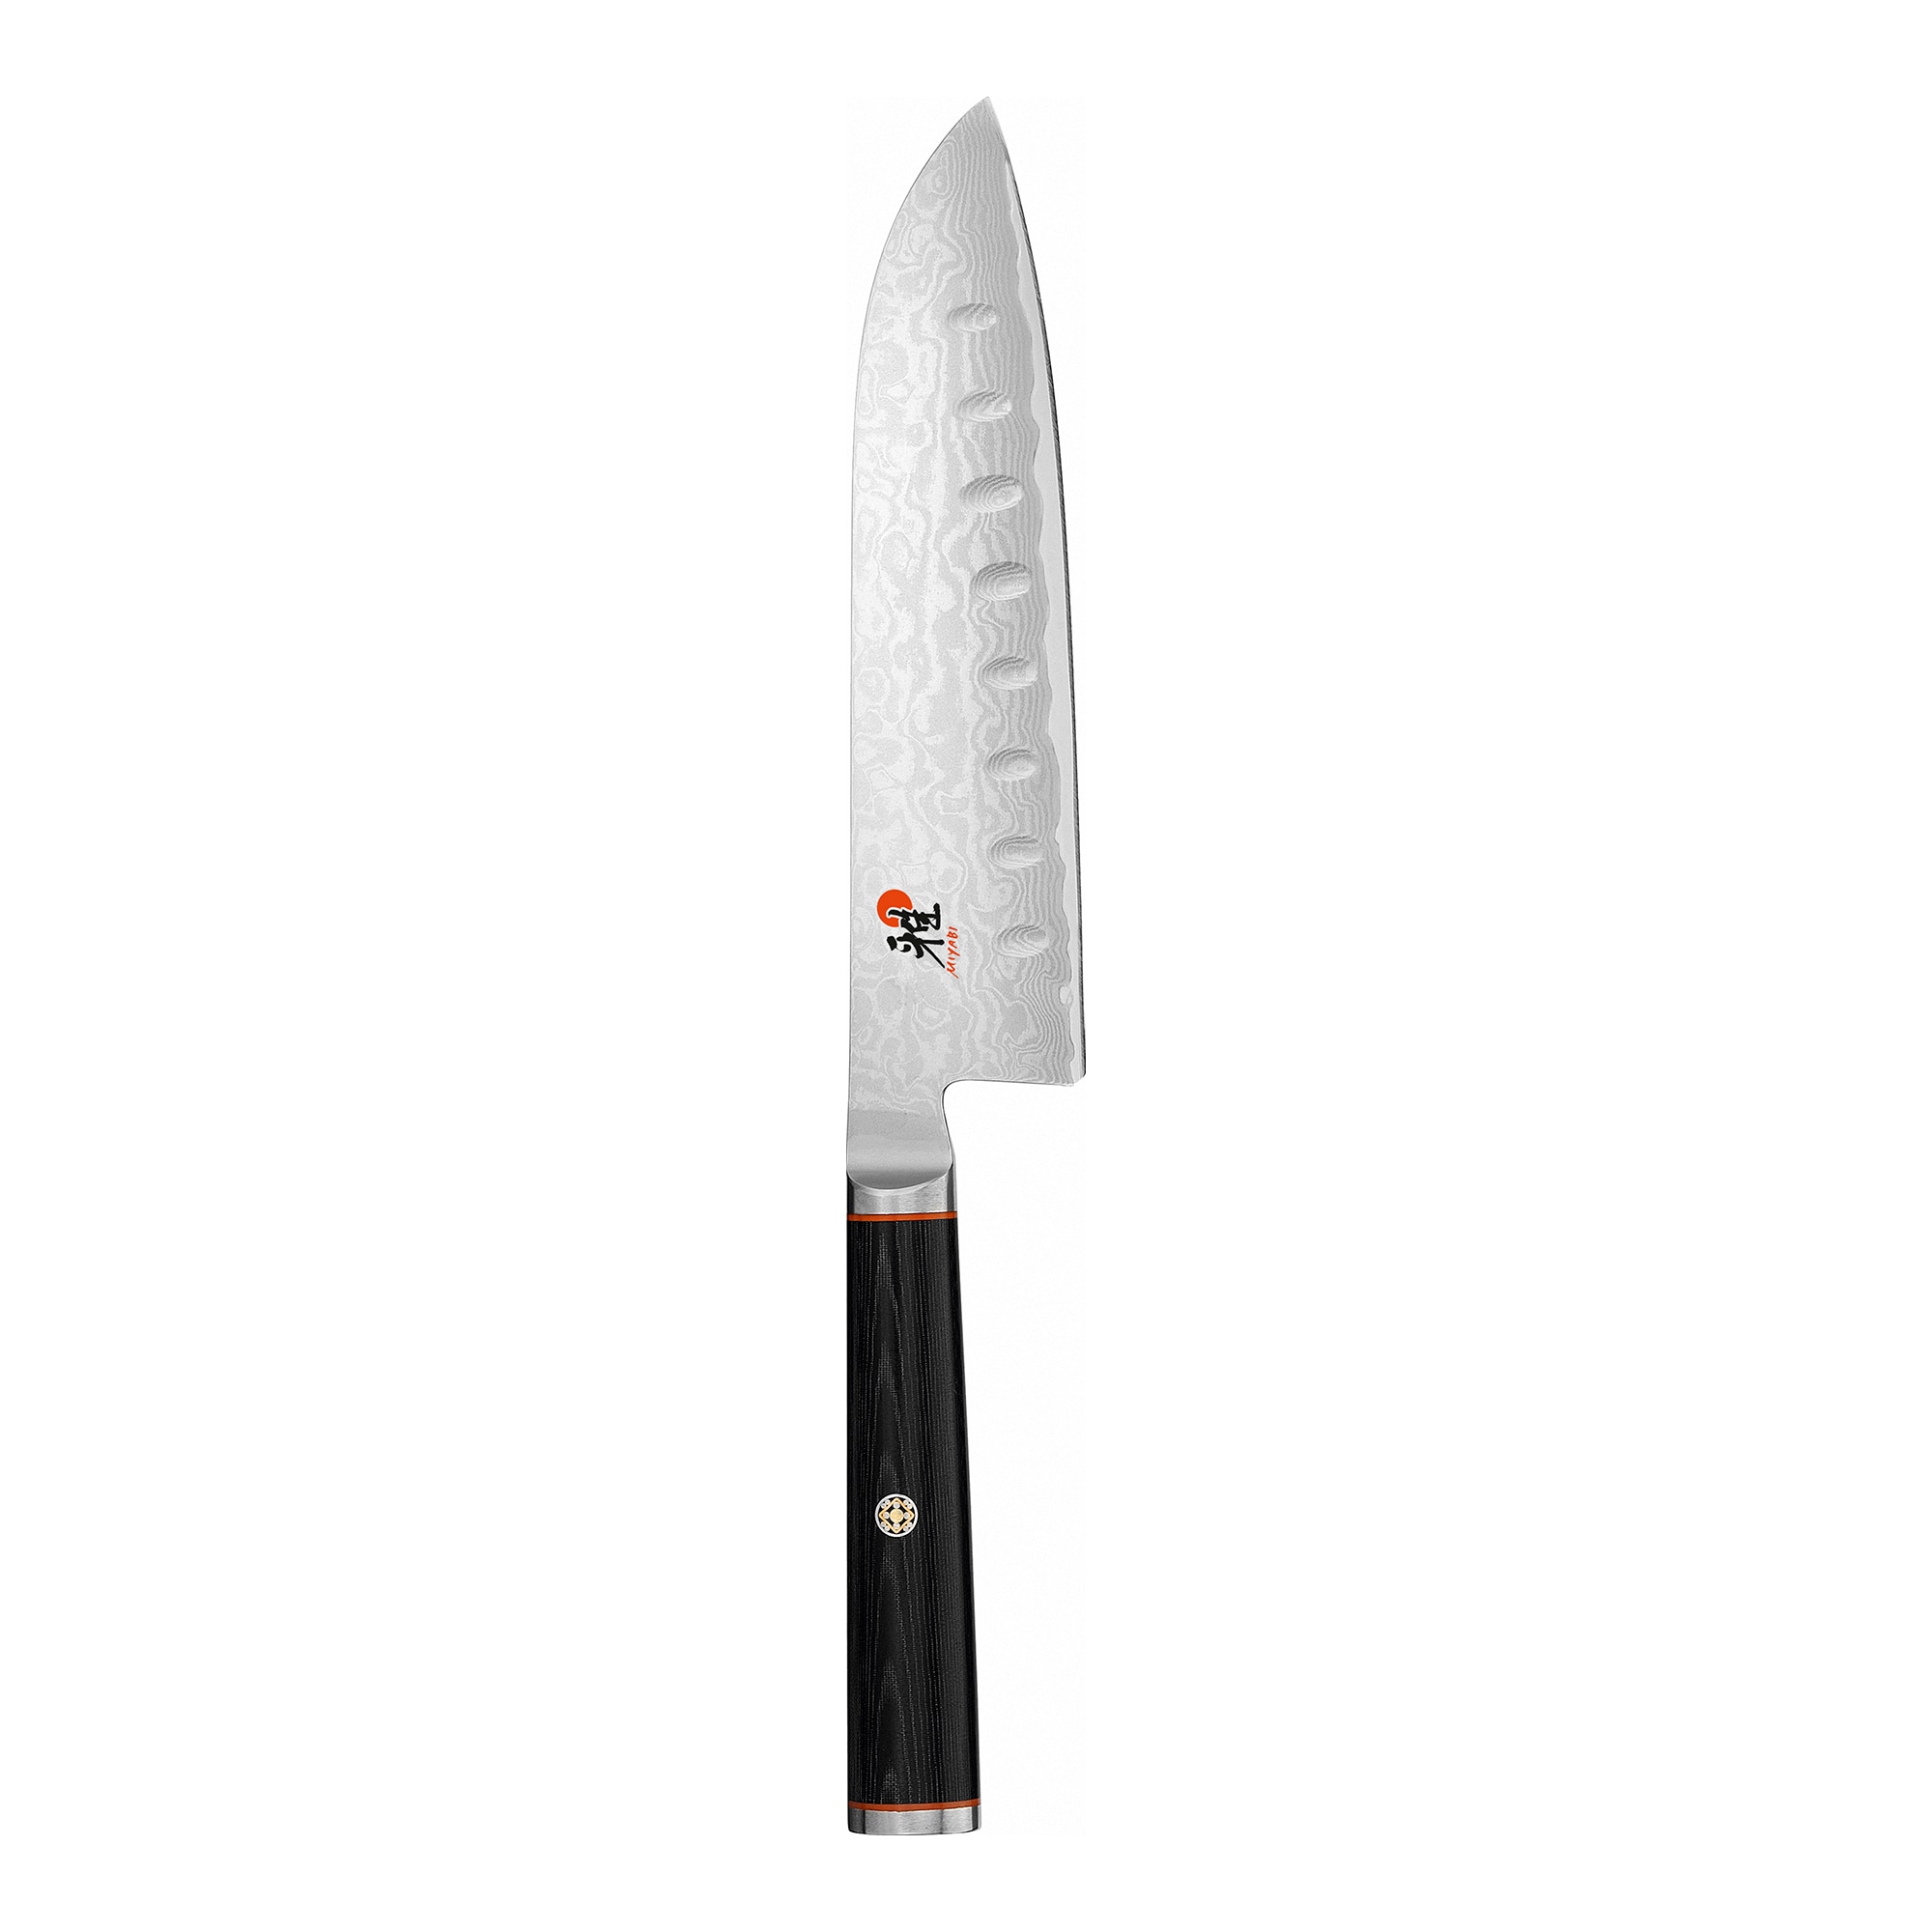 9-Inch Kitchen Knife Professional Chef Knife Stainless Steel Vegetable Knife Safe Non-Stick Coating Blade with Anti-Slip Wooden Handle